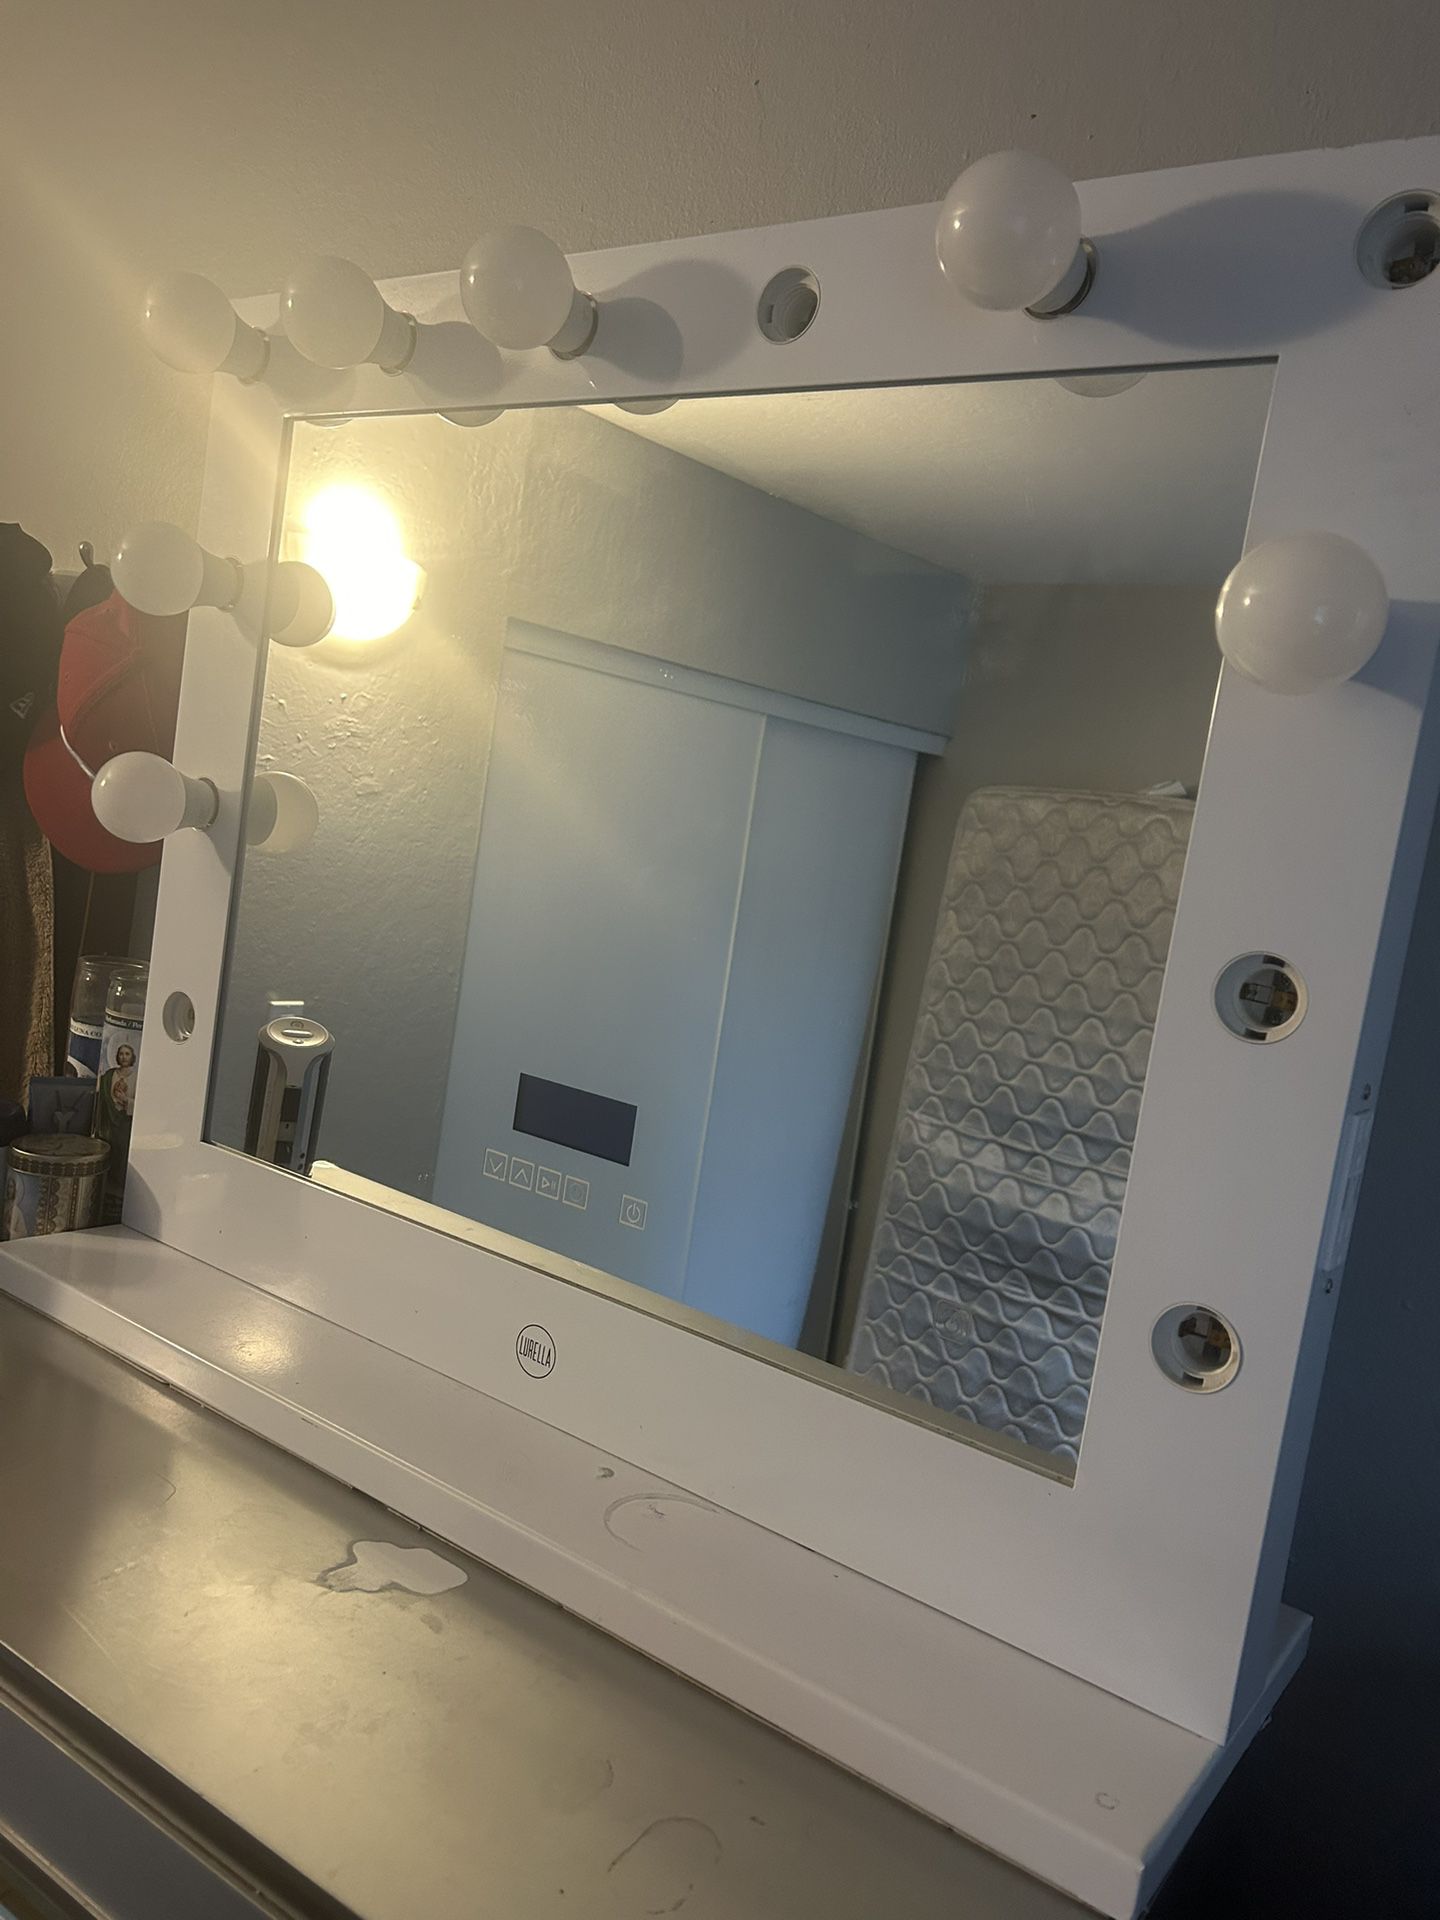 Vanity Mirror With Bluetooth No Lightbulbs Only Couple